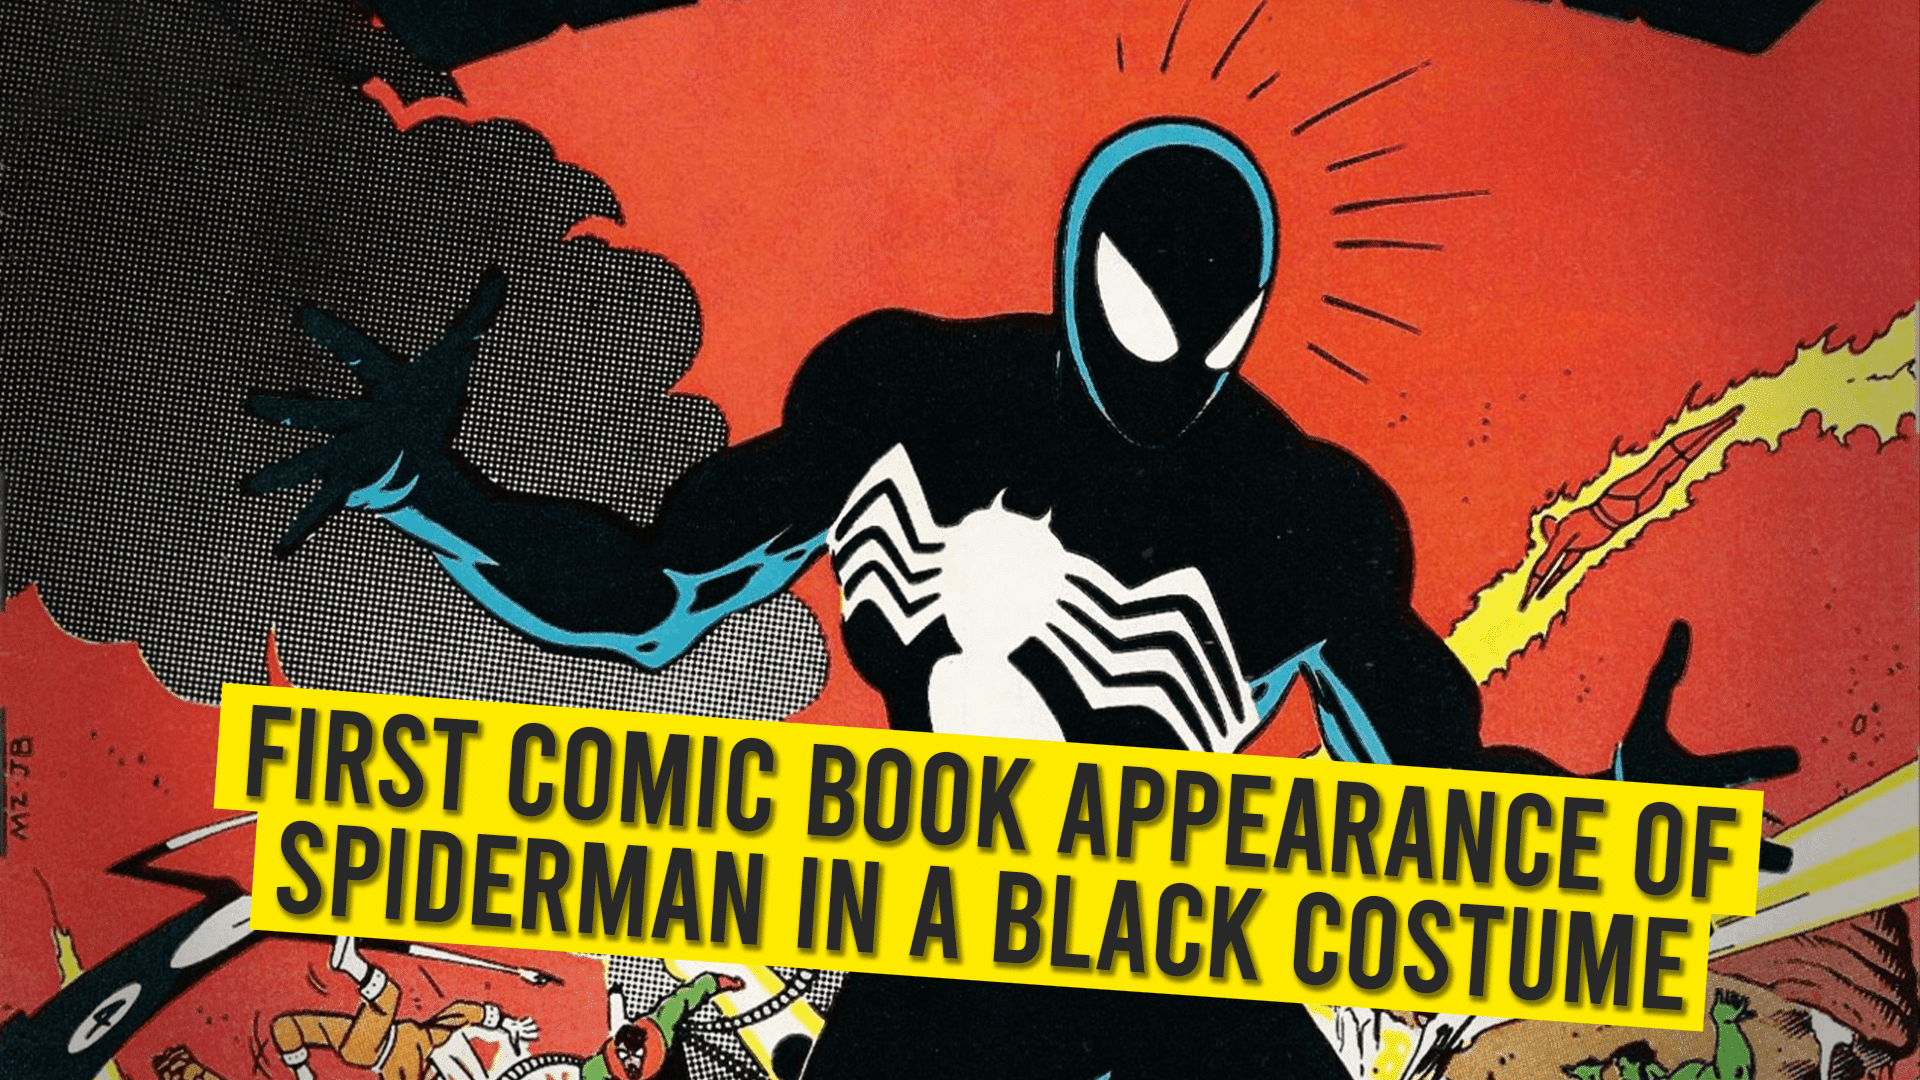 First Comic Book Appearance of Spiderman in a Black Costume